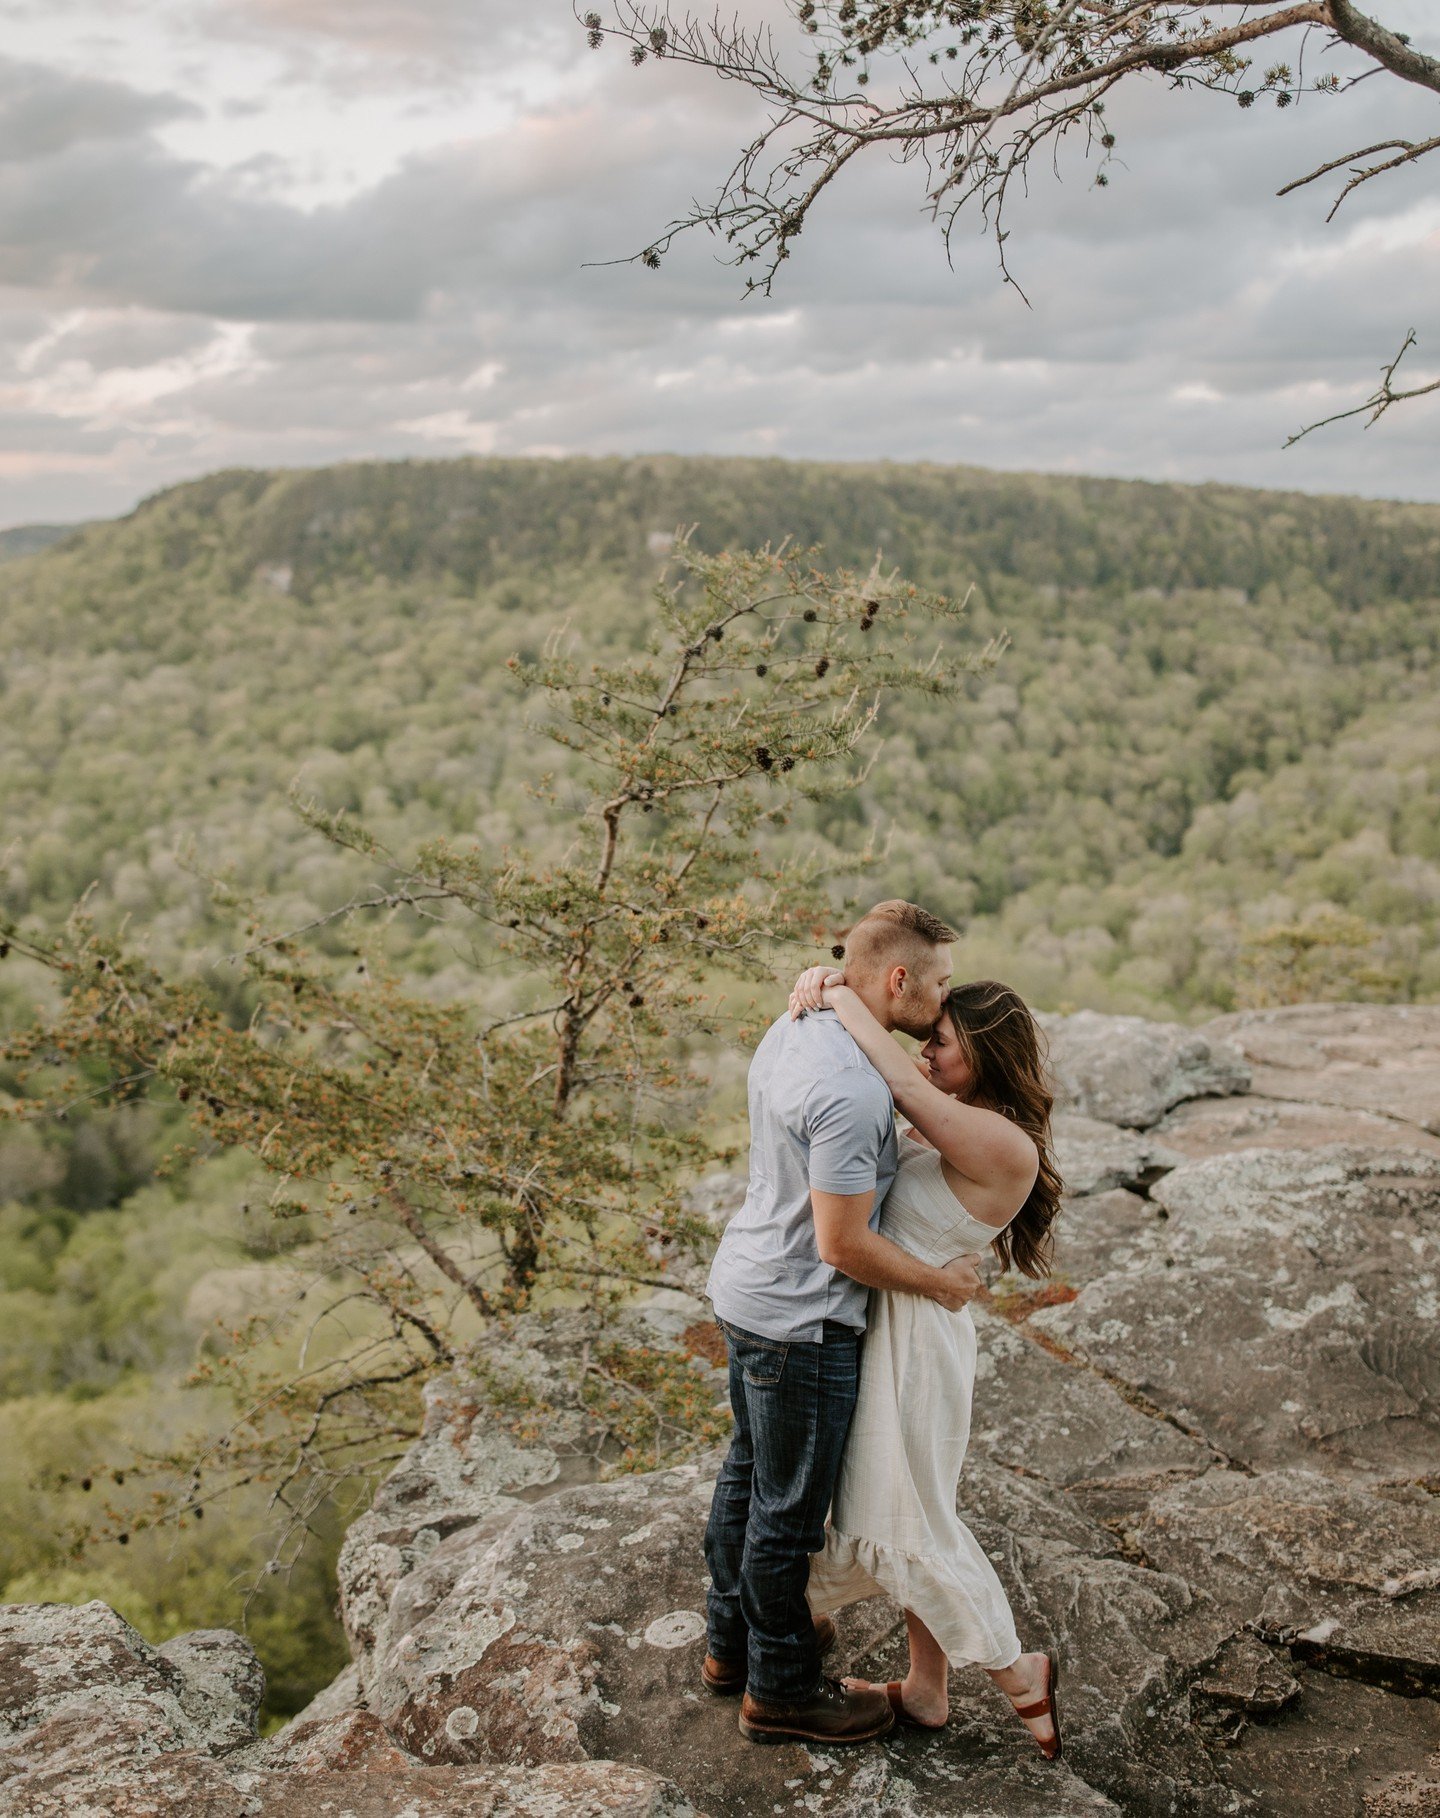 It's that time of year where all I want to do is disappear and camp somewhere, but my biggest first world problem is that I have a wonderful job where during the prettiest parts of the year, everyone wants to get married and I get to photograph it, w